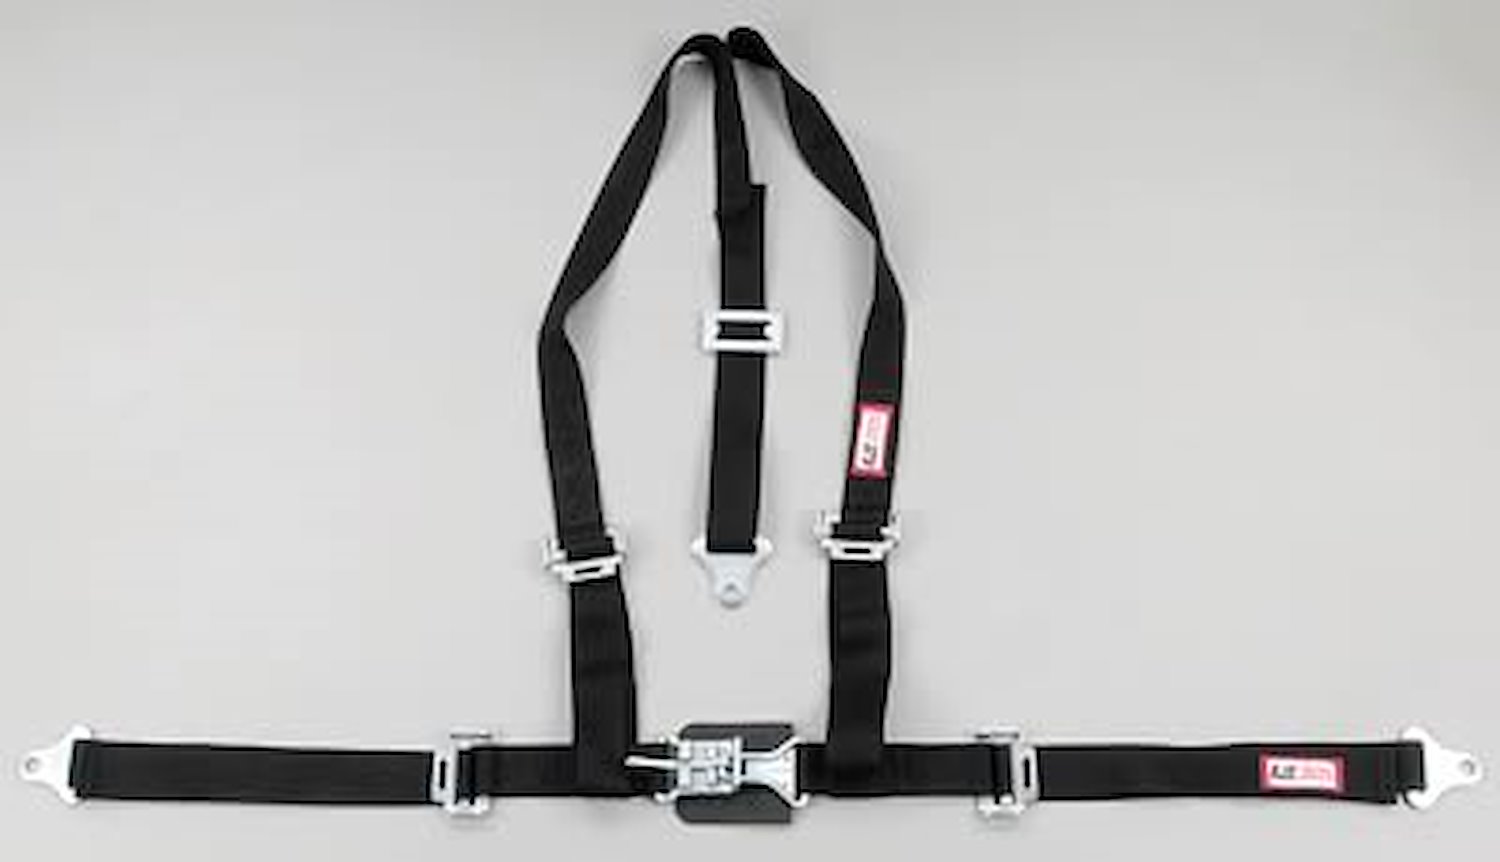 NON-SFI L&L HARNESS 3 PULL DOWN Lap Belt w/adjuster SNAP 2 S.H. Individual ROLL BAR Mount w/STERNUM STRAP WRAP/SNAP RED